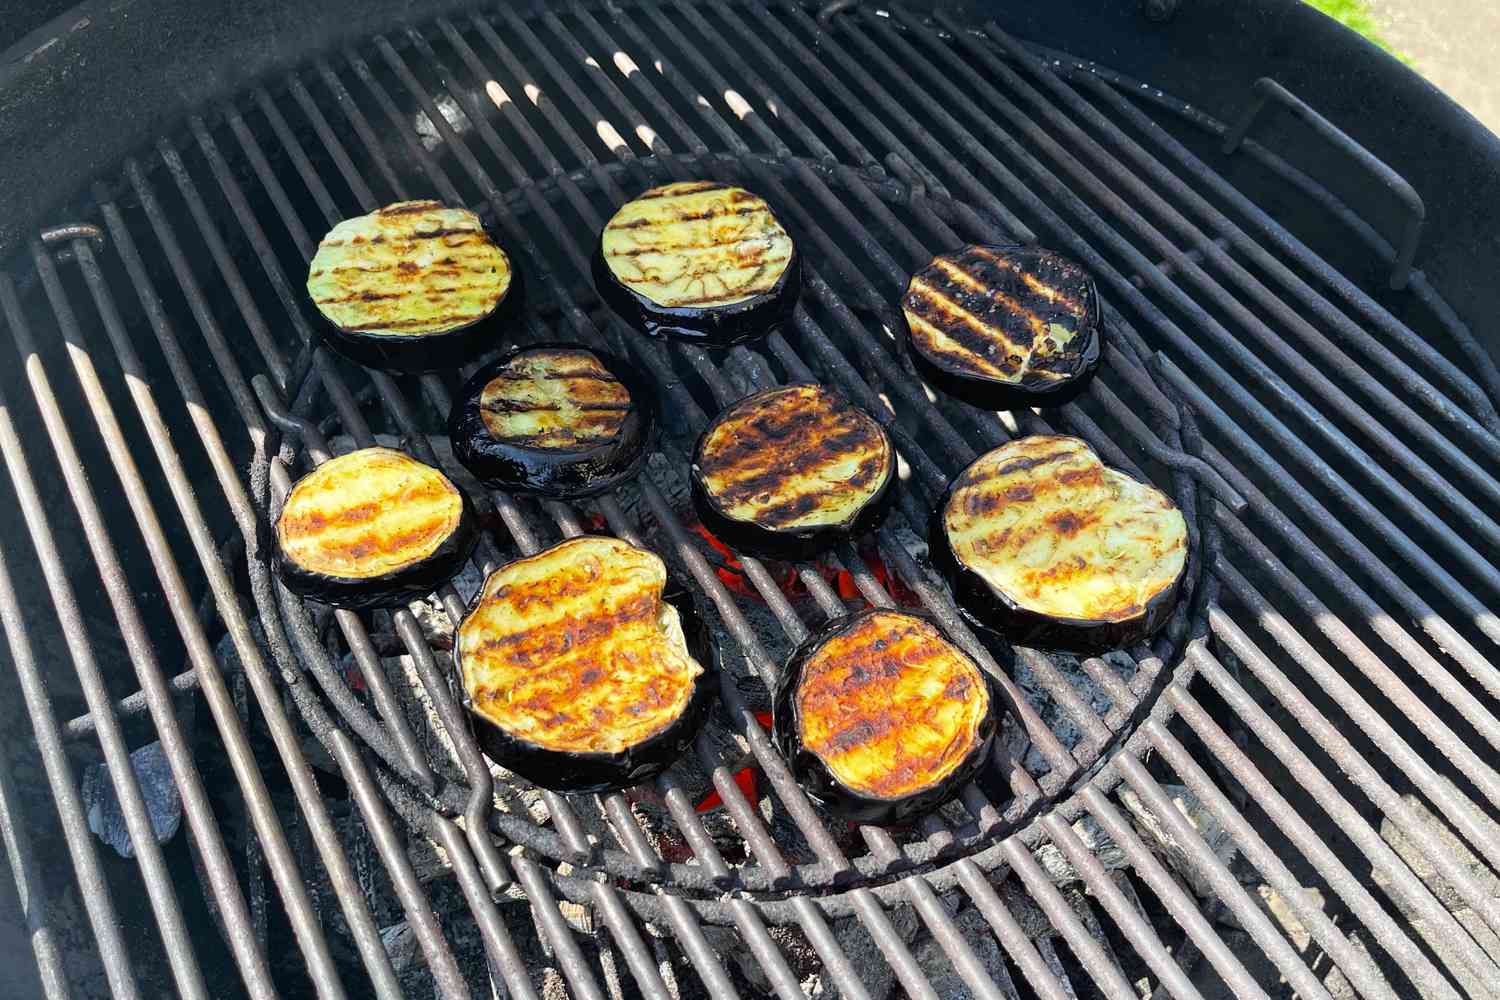 Eggplant slices cooking on a grill over Big Green Egg Natural Oak and Hickory Lump Charcoal